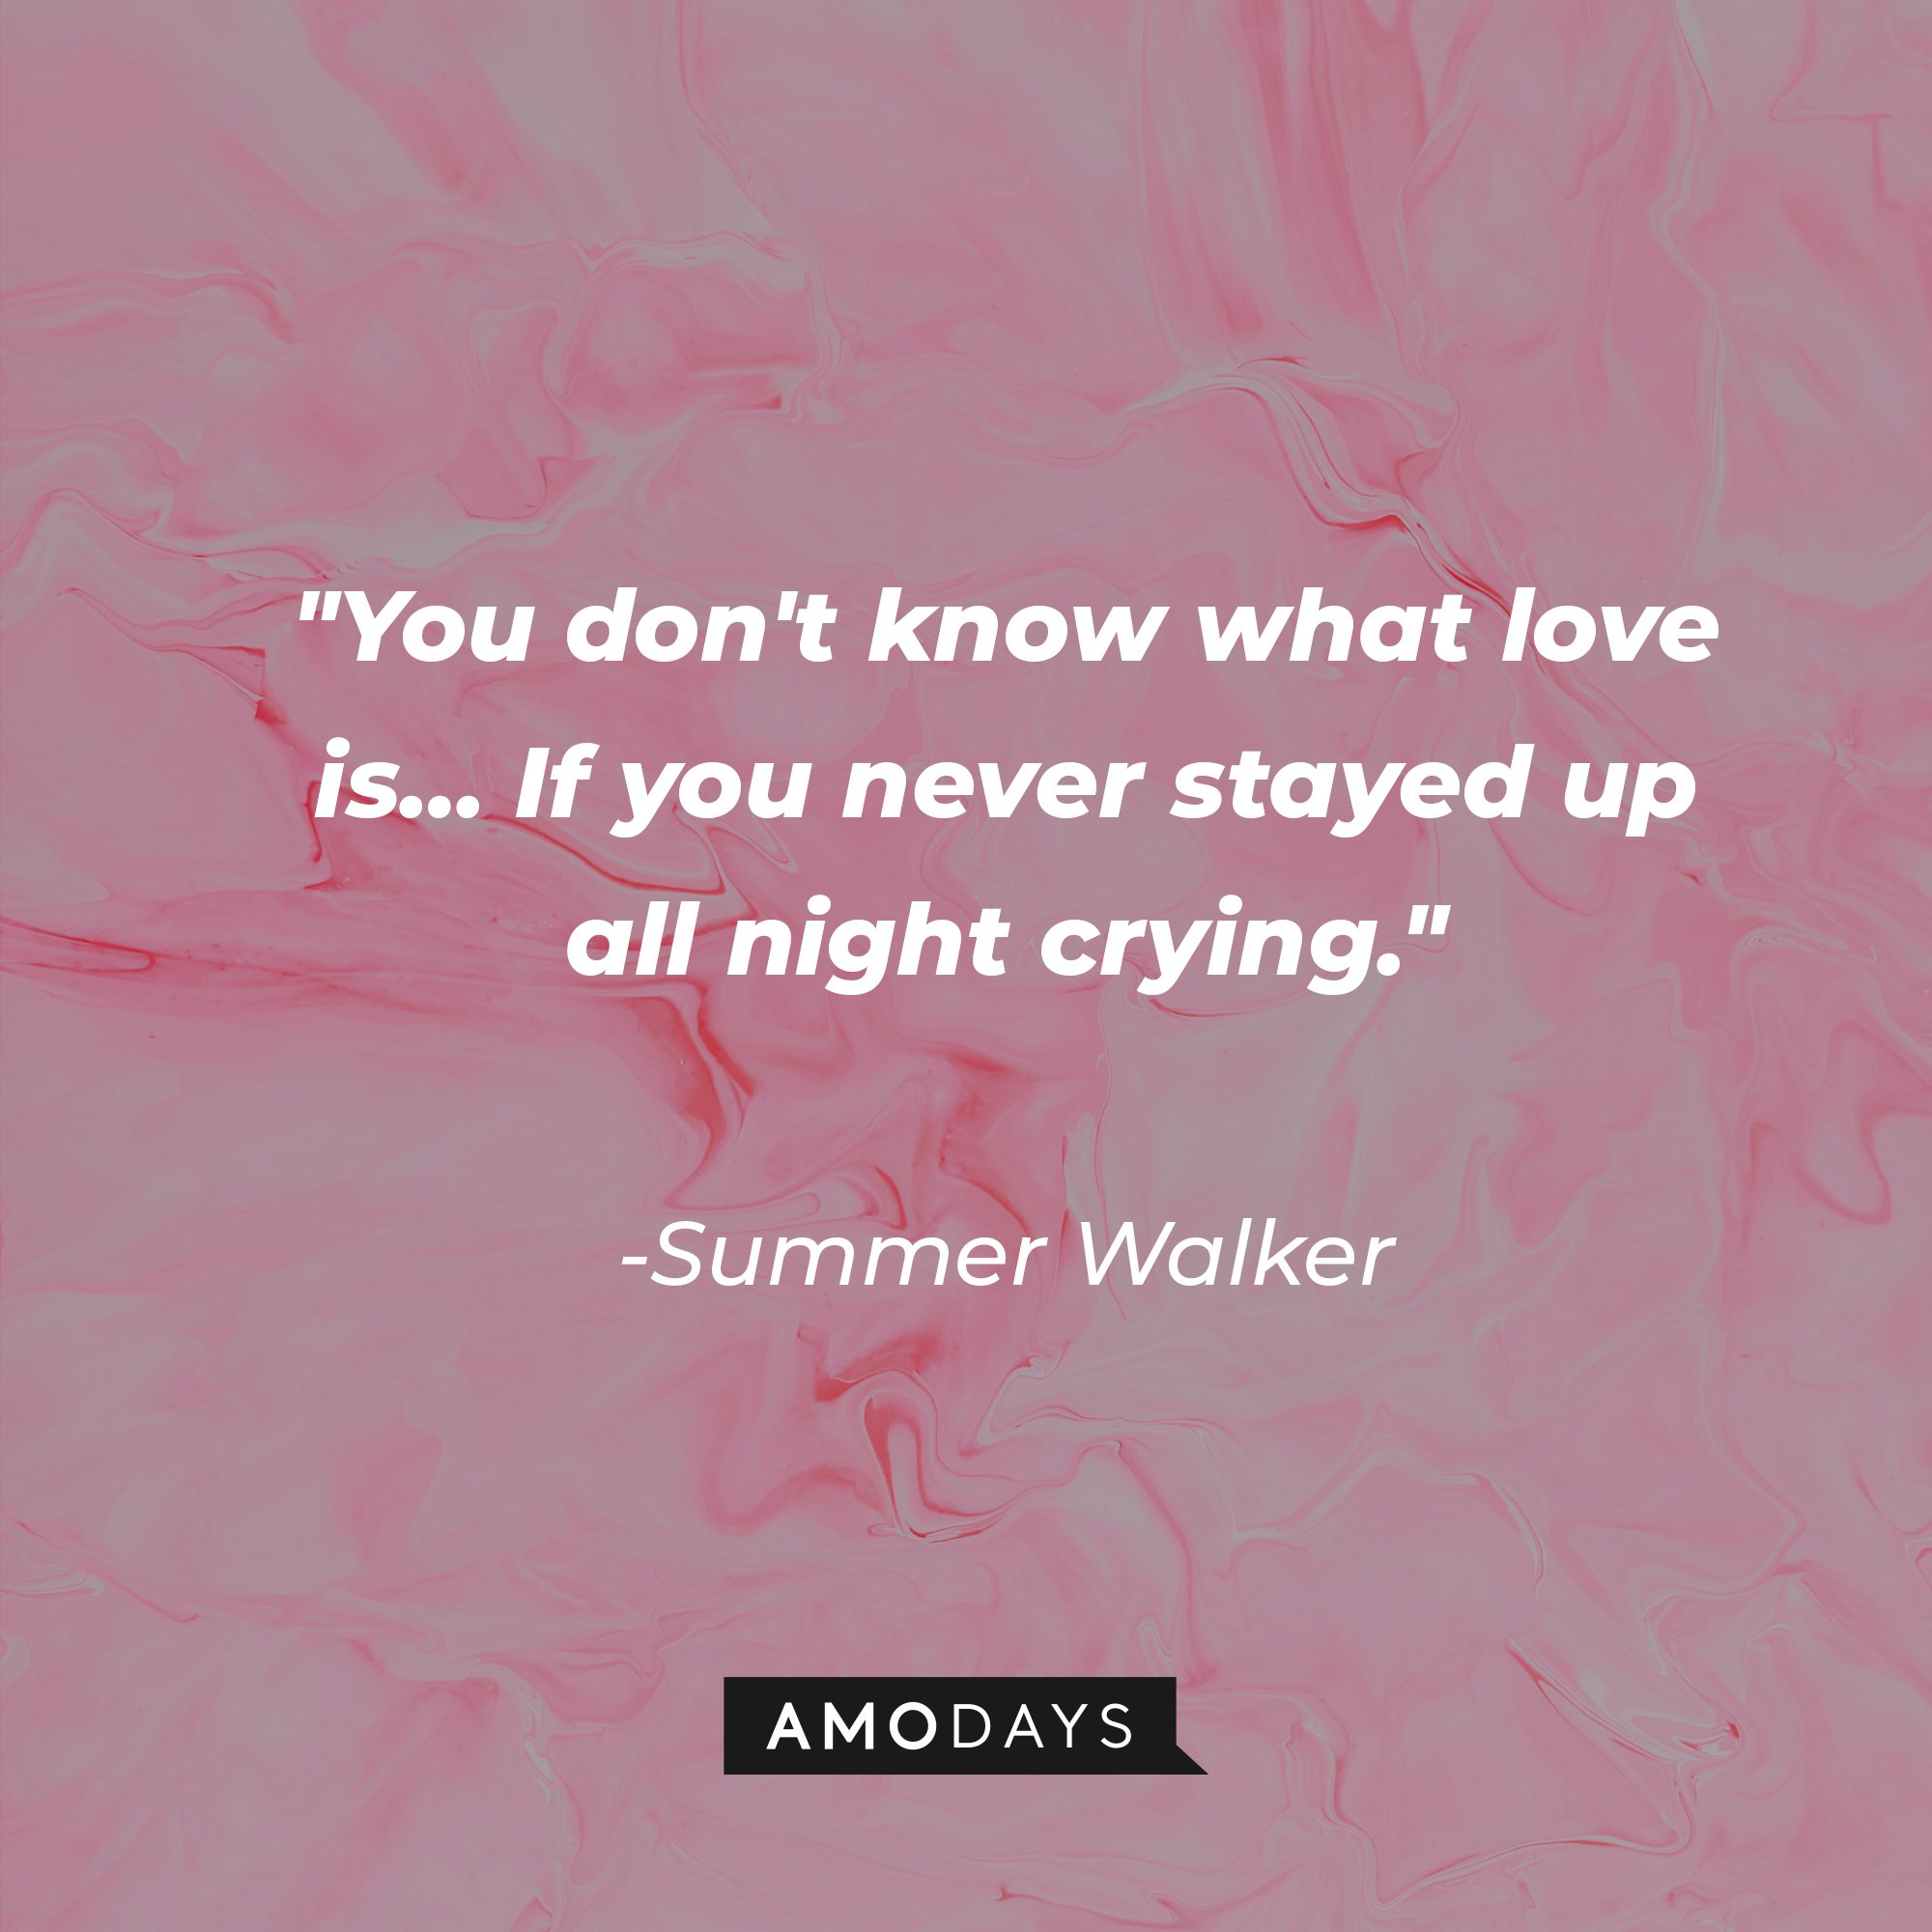 Summer Walker's quote: "You don't know what love is… If you never stayed up all night crying." | Image: AmoDays